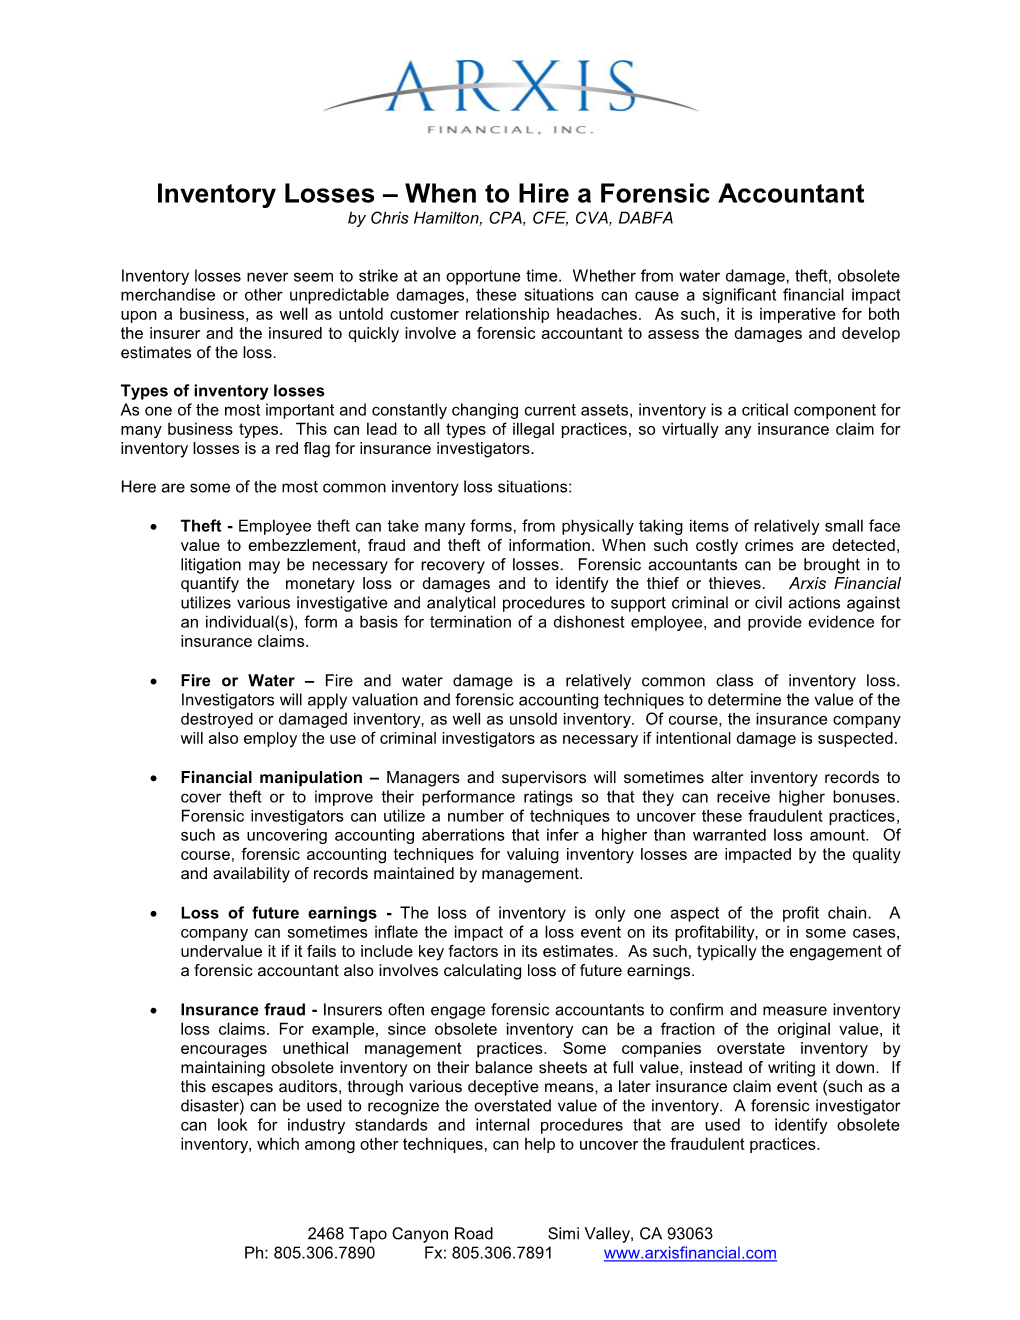 Inventory Losses – When to Hire a Forensic Accountant by Chris Hamilton, CPA, CFE, CVA, DABFA